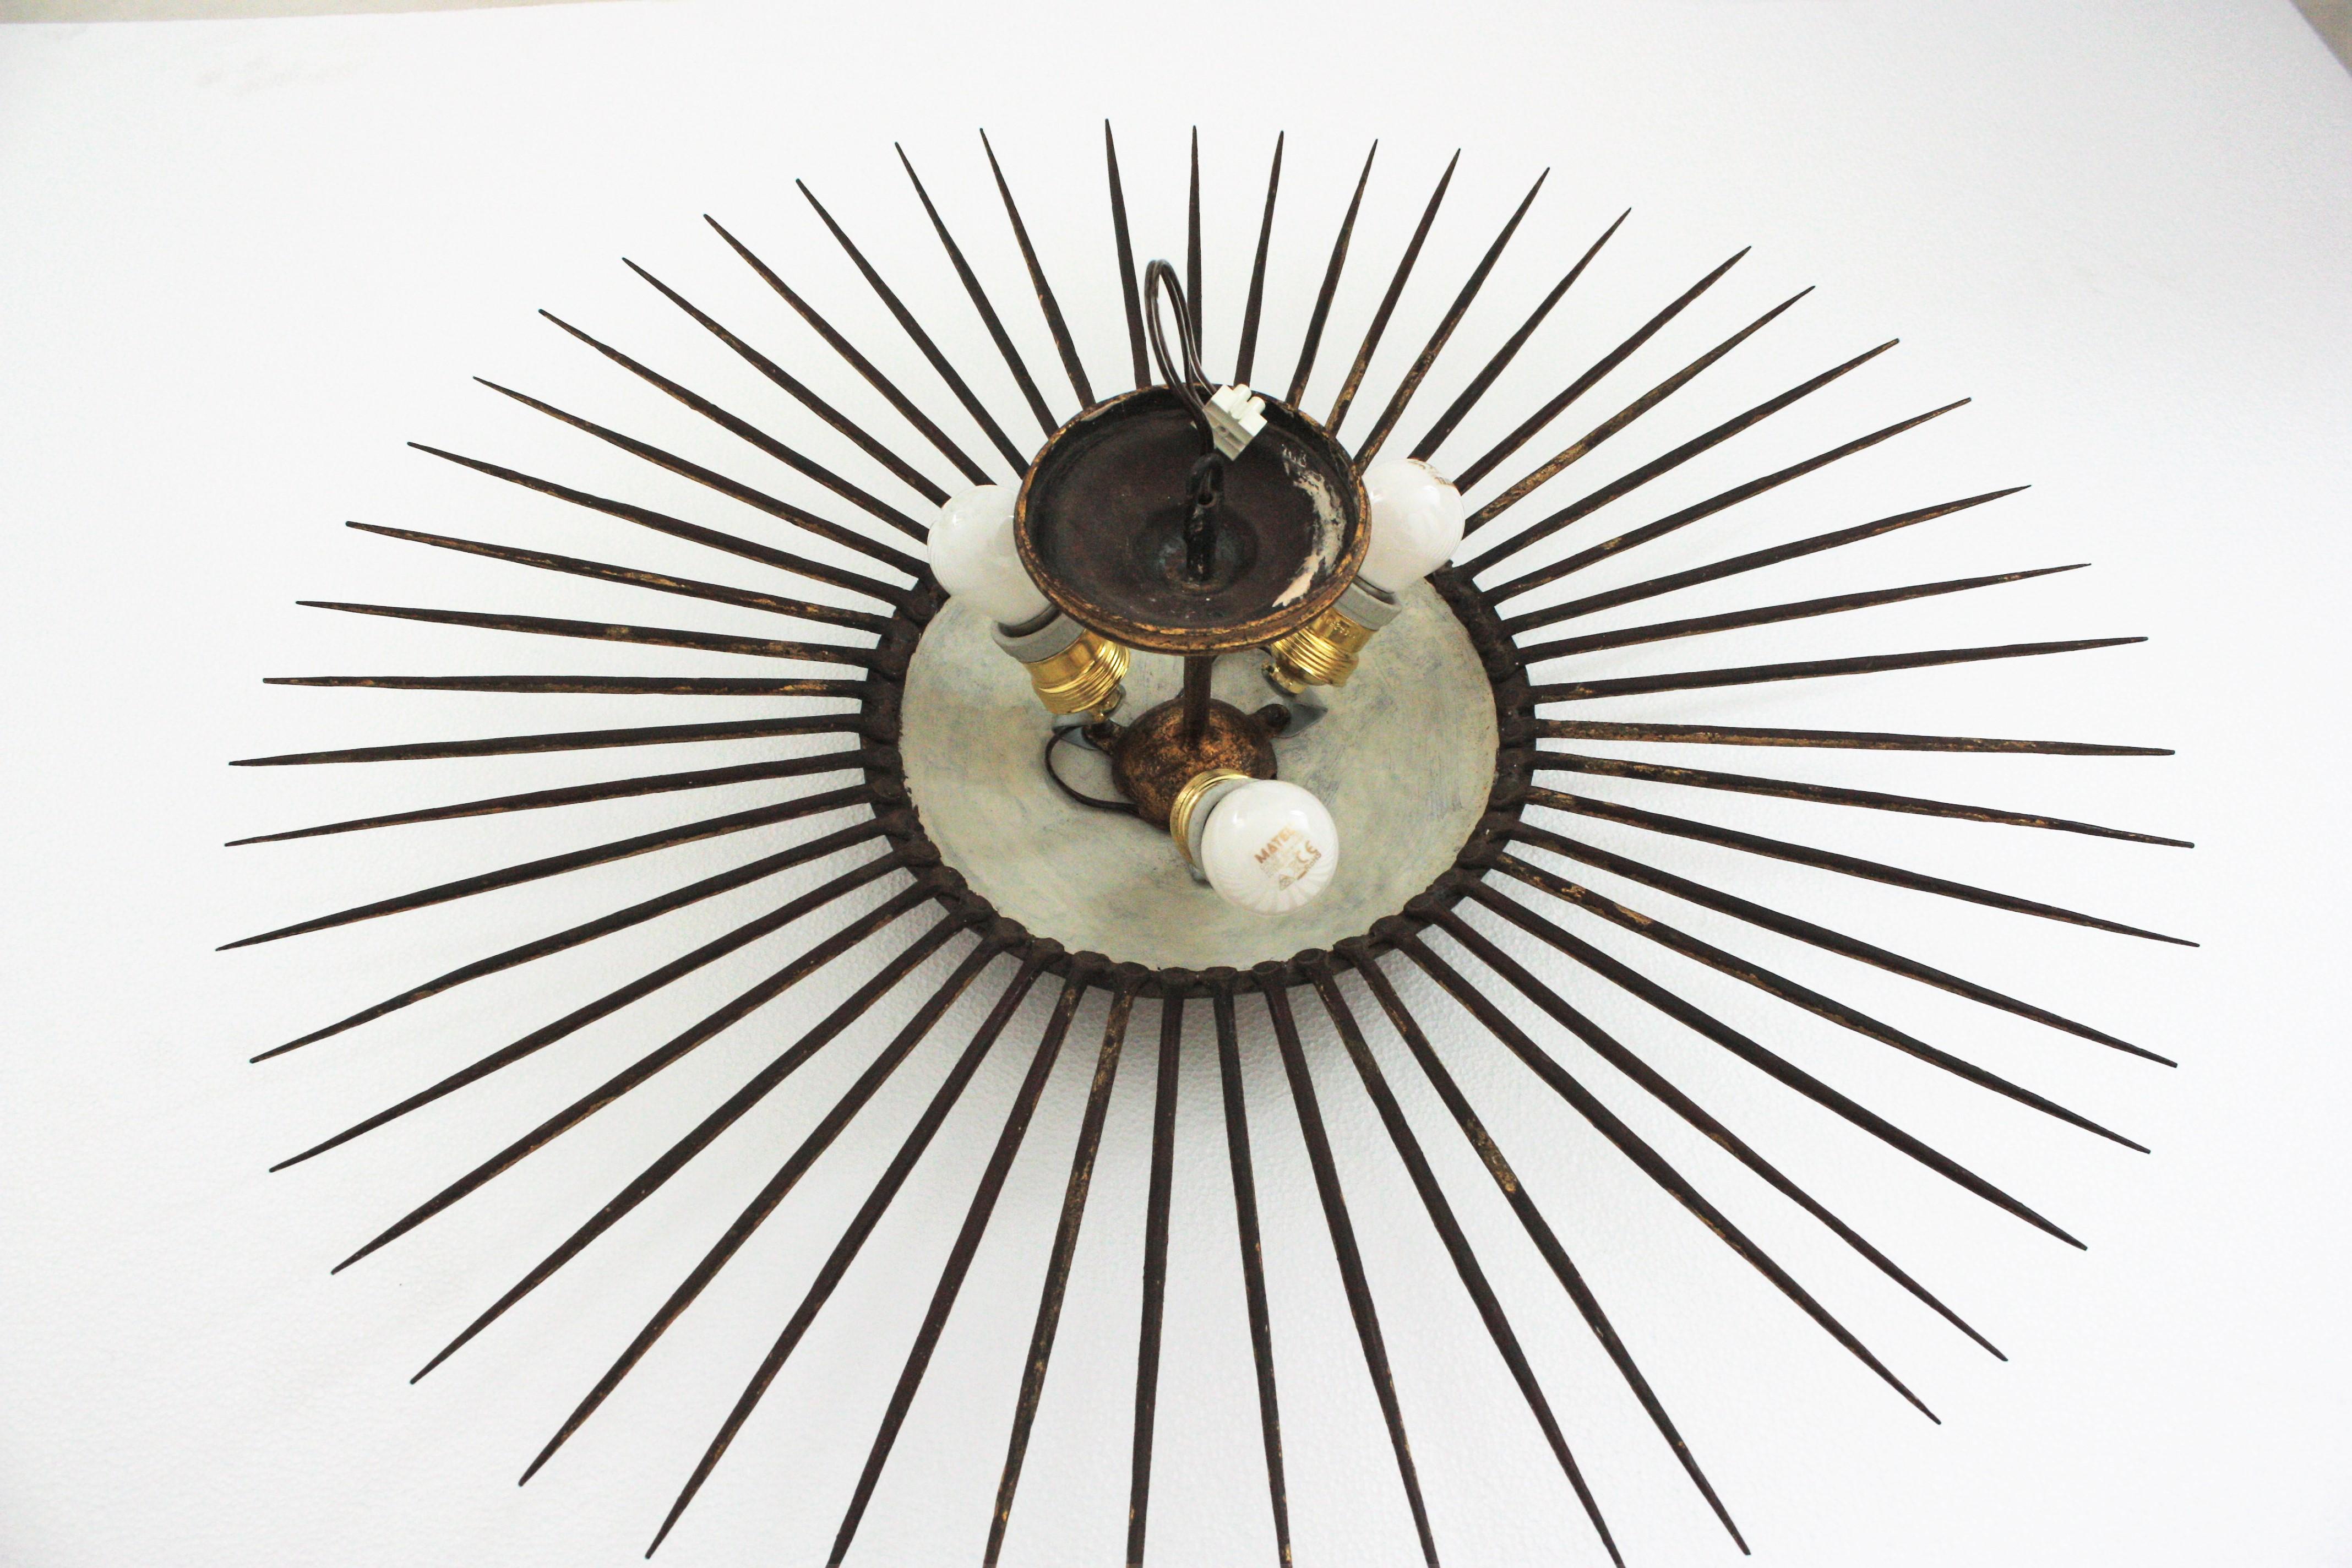 French Sunburst Ceiling Light Fixture in Gilt Wrought Iron, 1940s For Sale 10